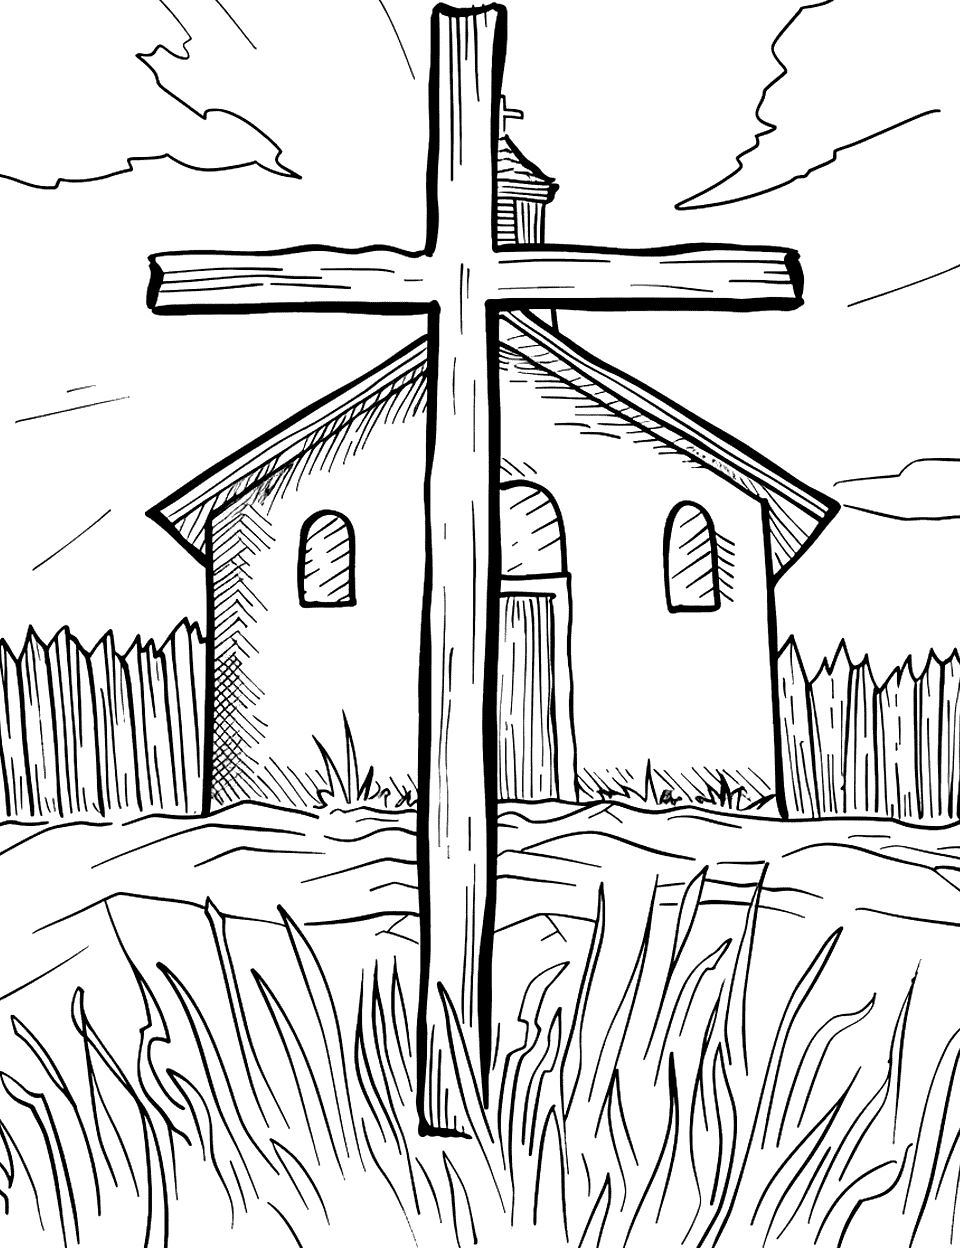 Catholic Church Cross Coloring Page - A cross in front of a Catholic church.